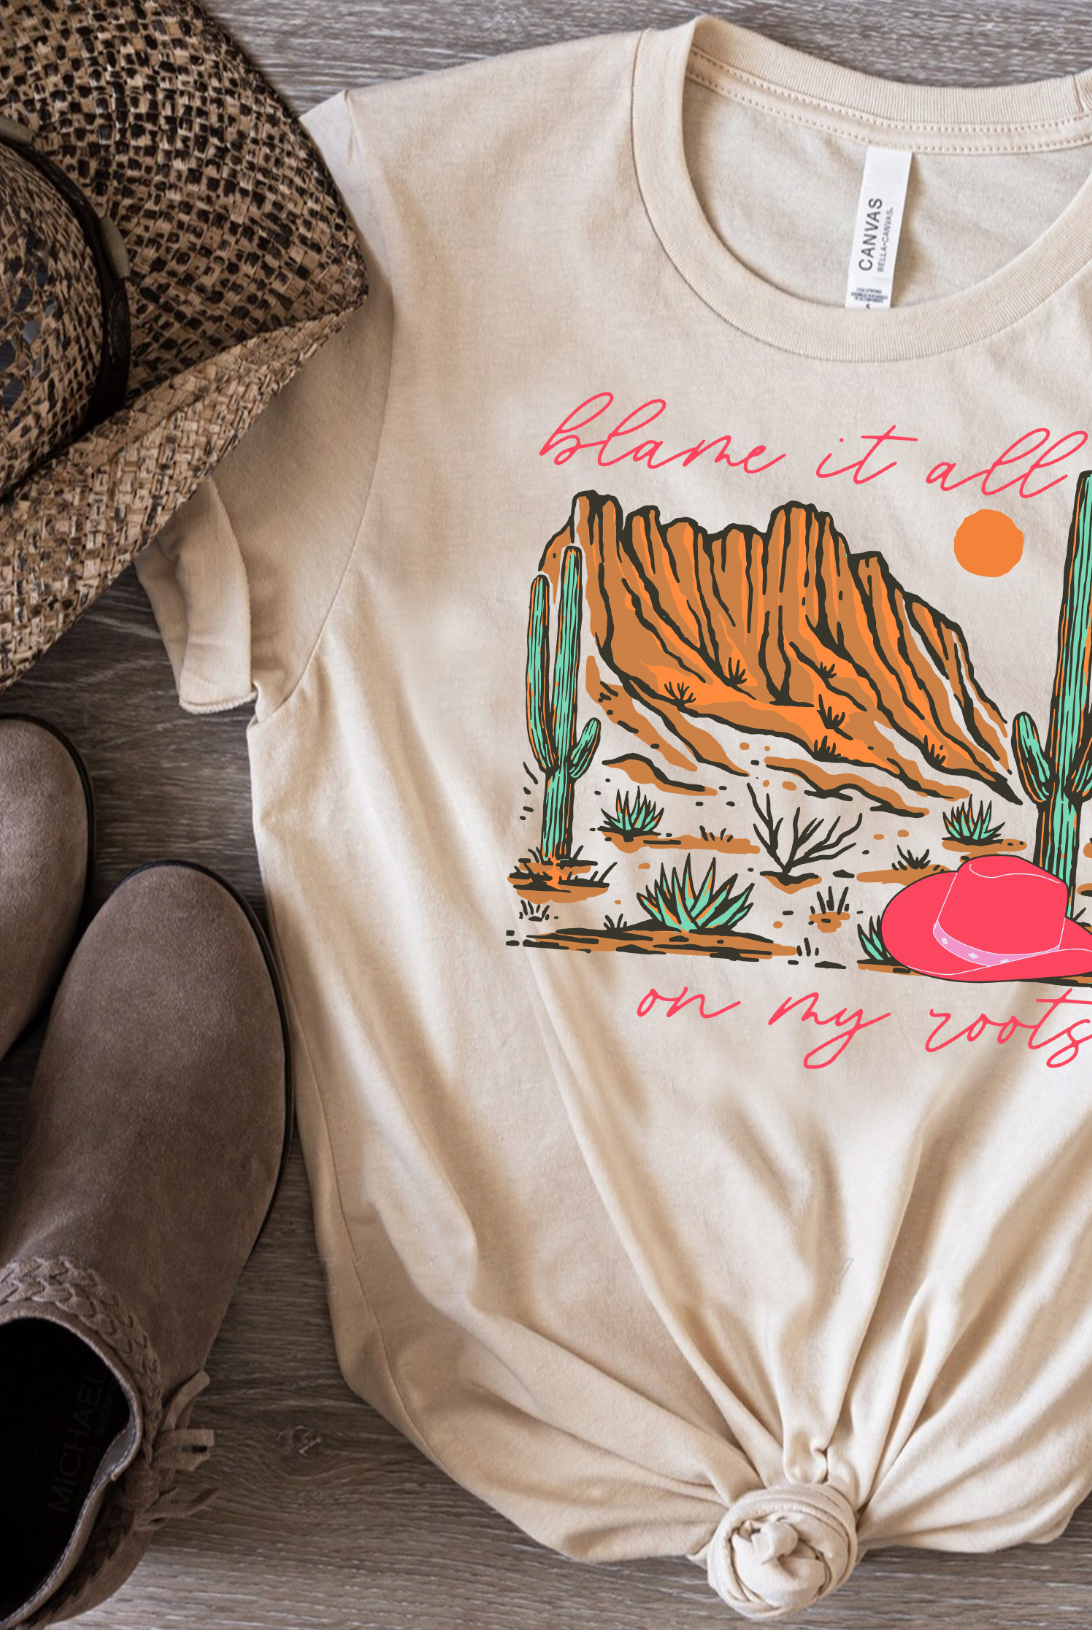 Blame it all on my roots. Bella and Canvas soft tee in Peach. Hand made and shipped from Texas.